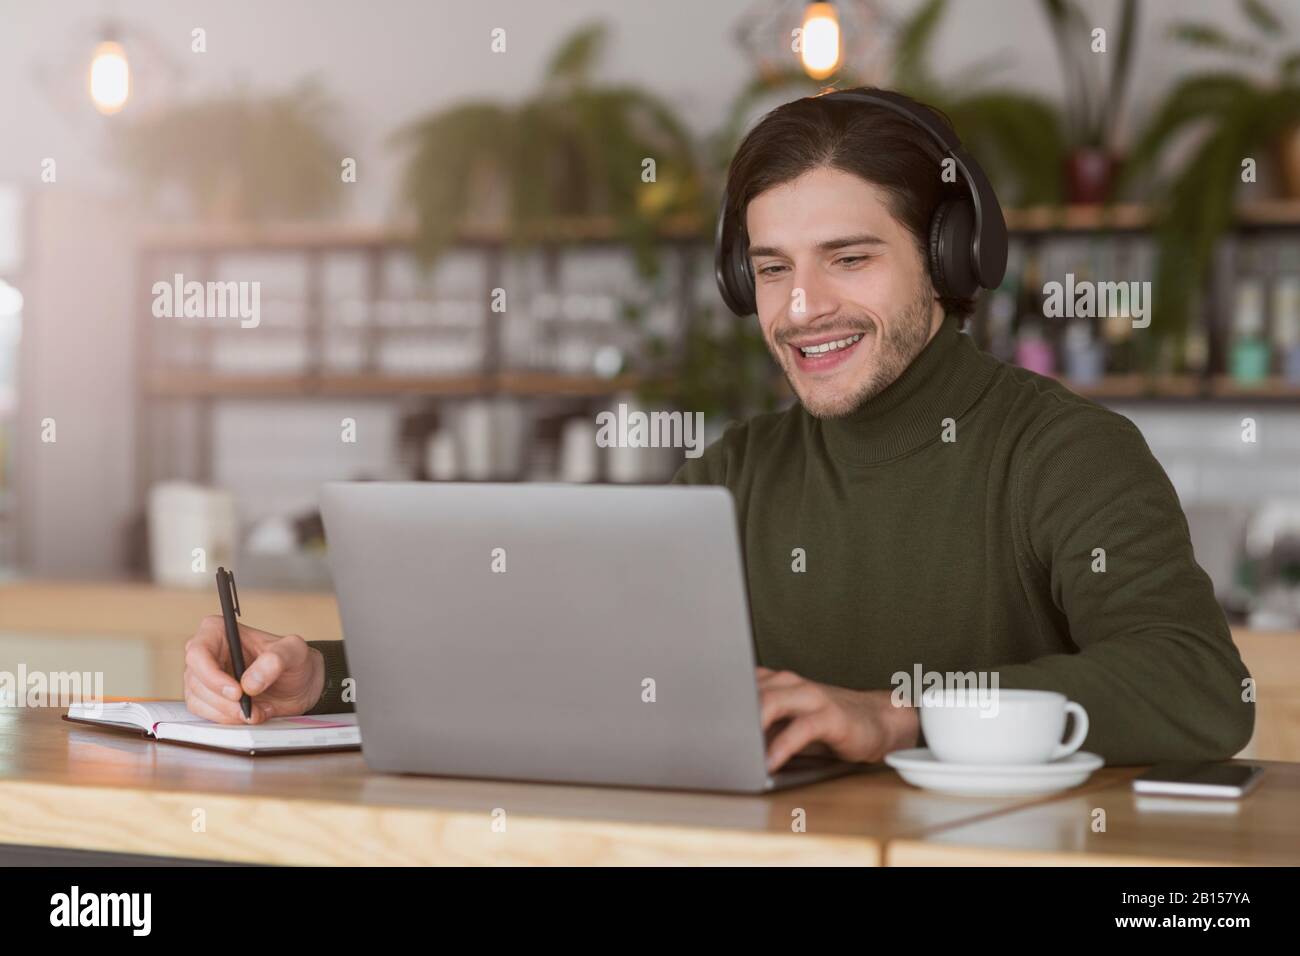 Young guy in wireless headphones studying online, using laptop Stock Photo